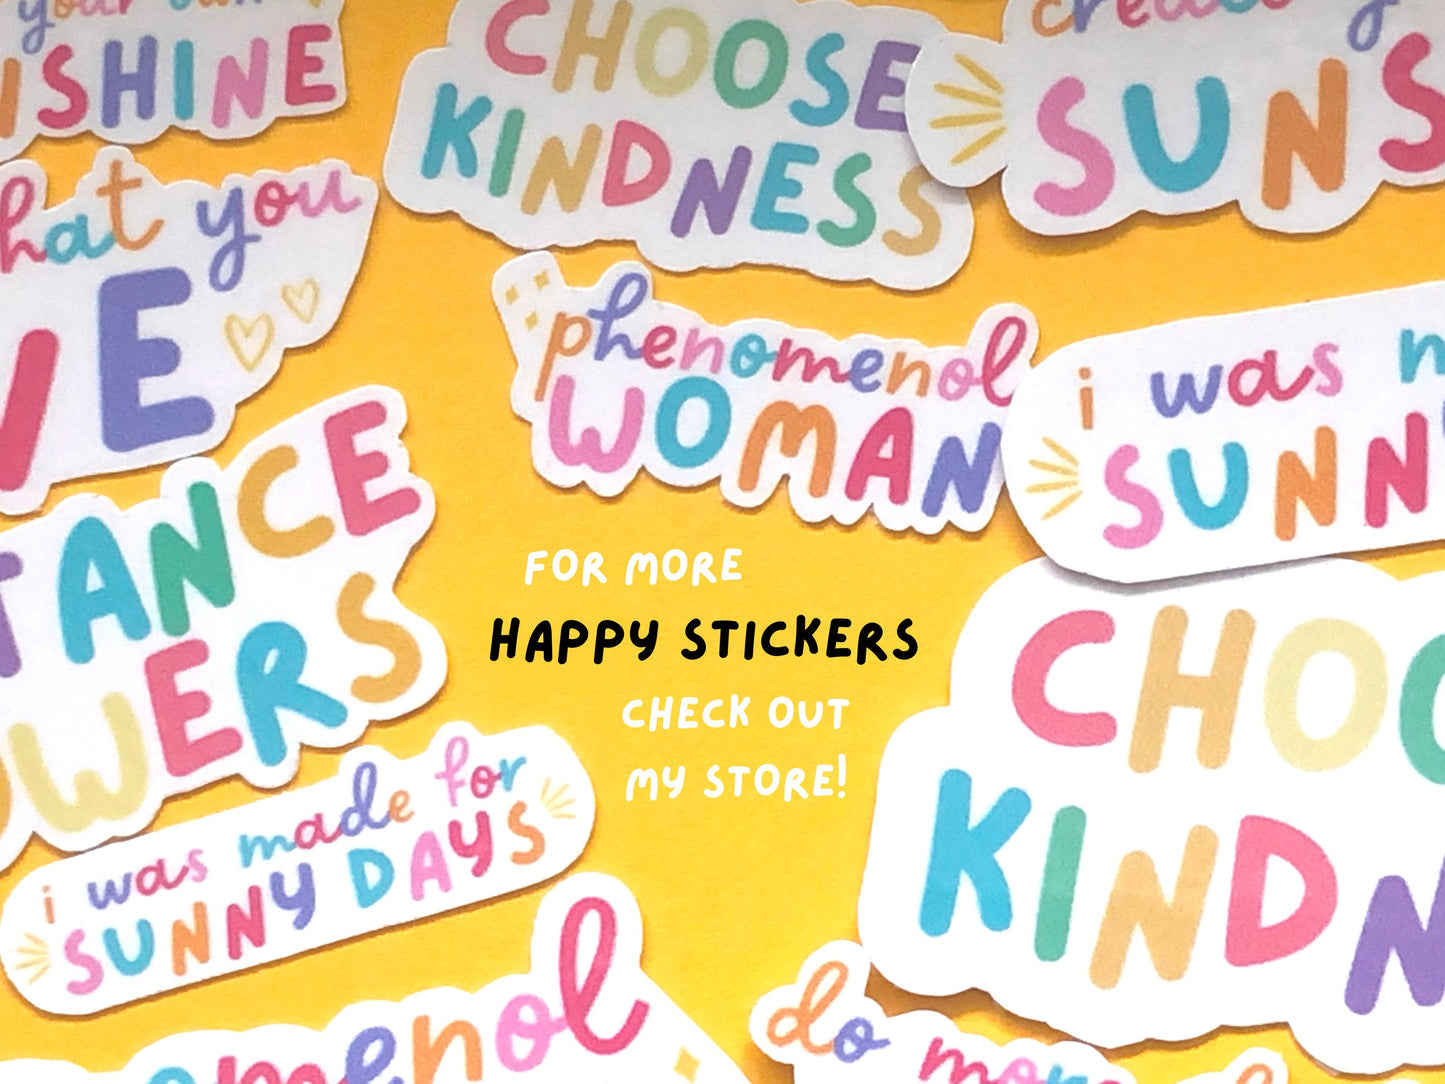 Do More Of What You Love Sticker | Aesthetic Sticker | Transparent Stickers